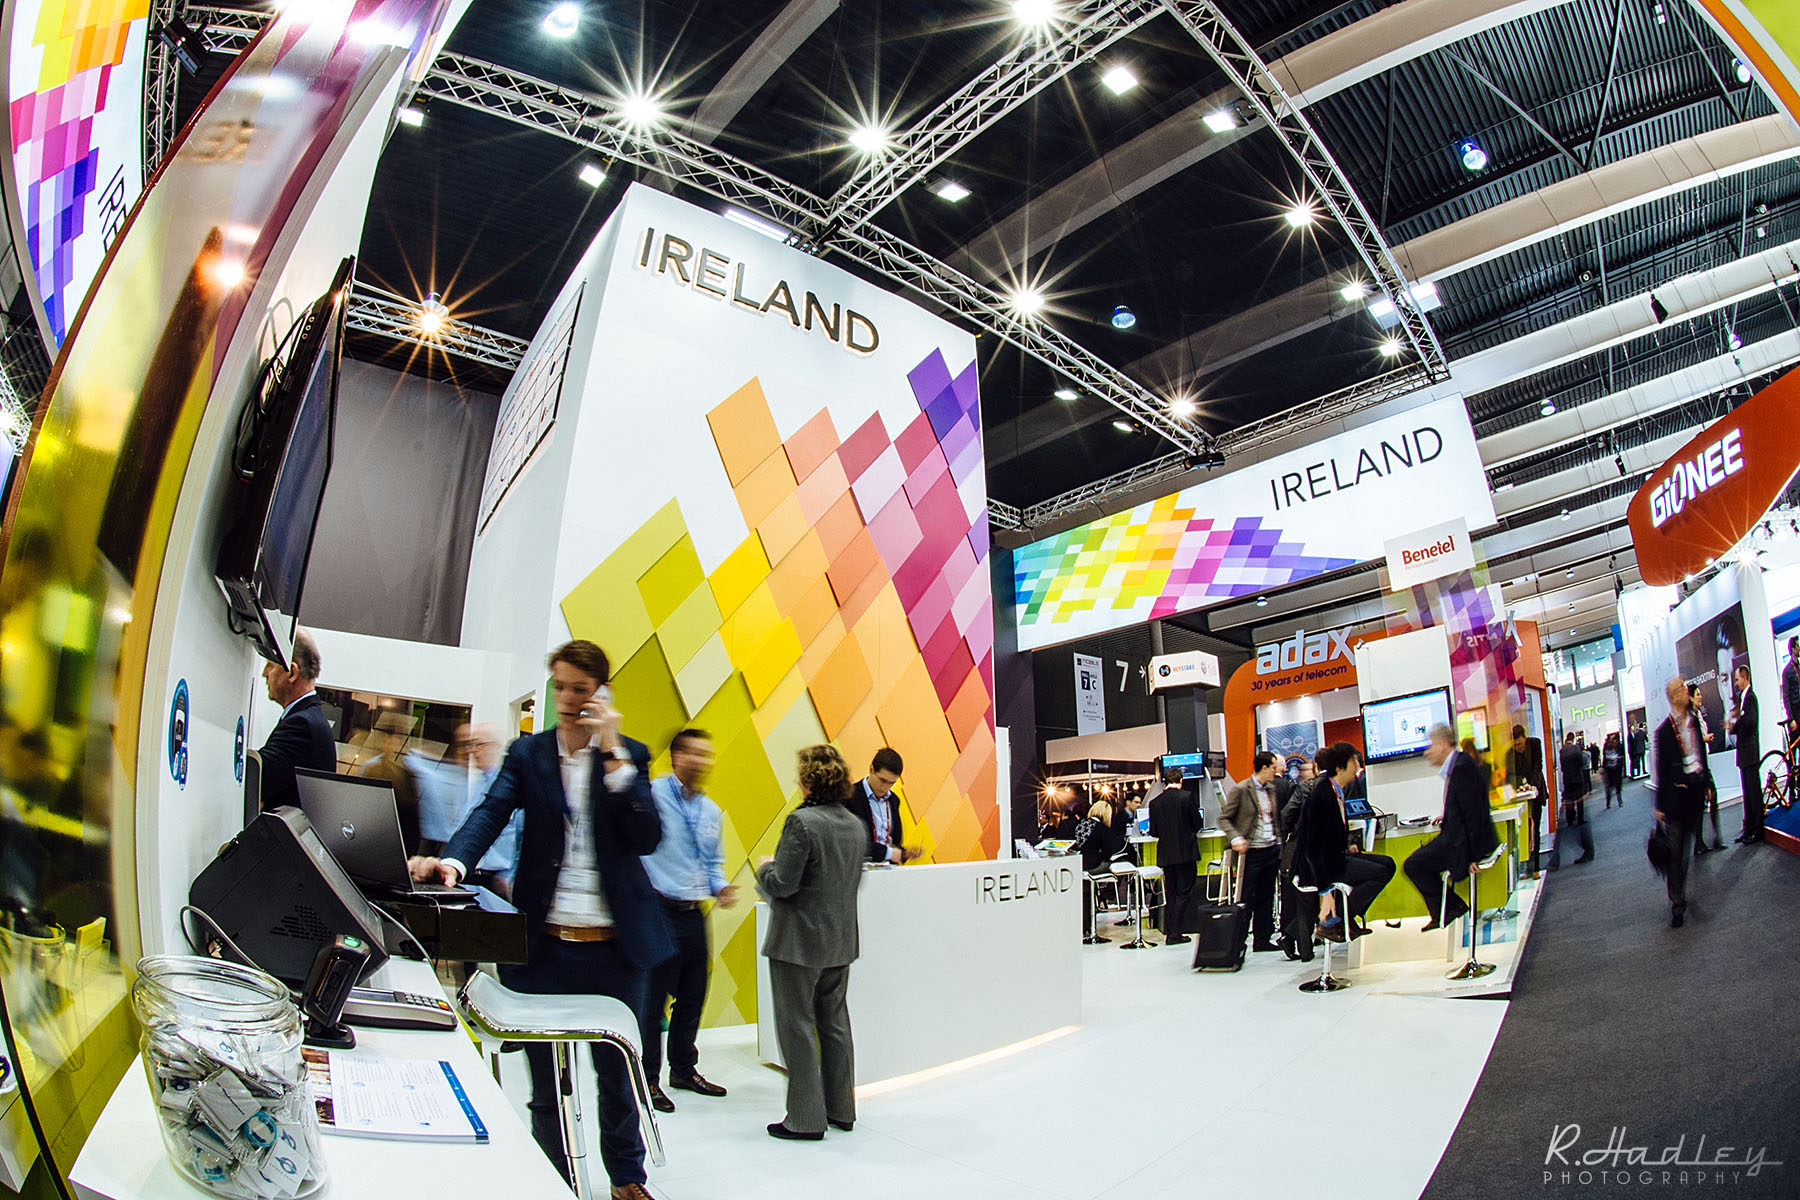 WMC - Event photography at the Mobile World Congress in Barcelona